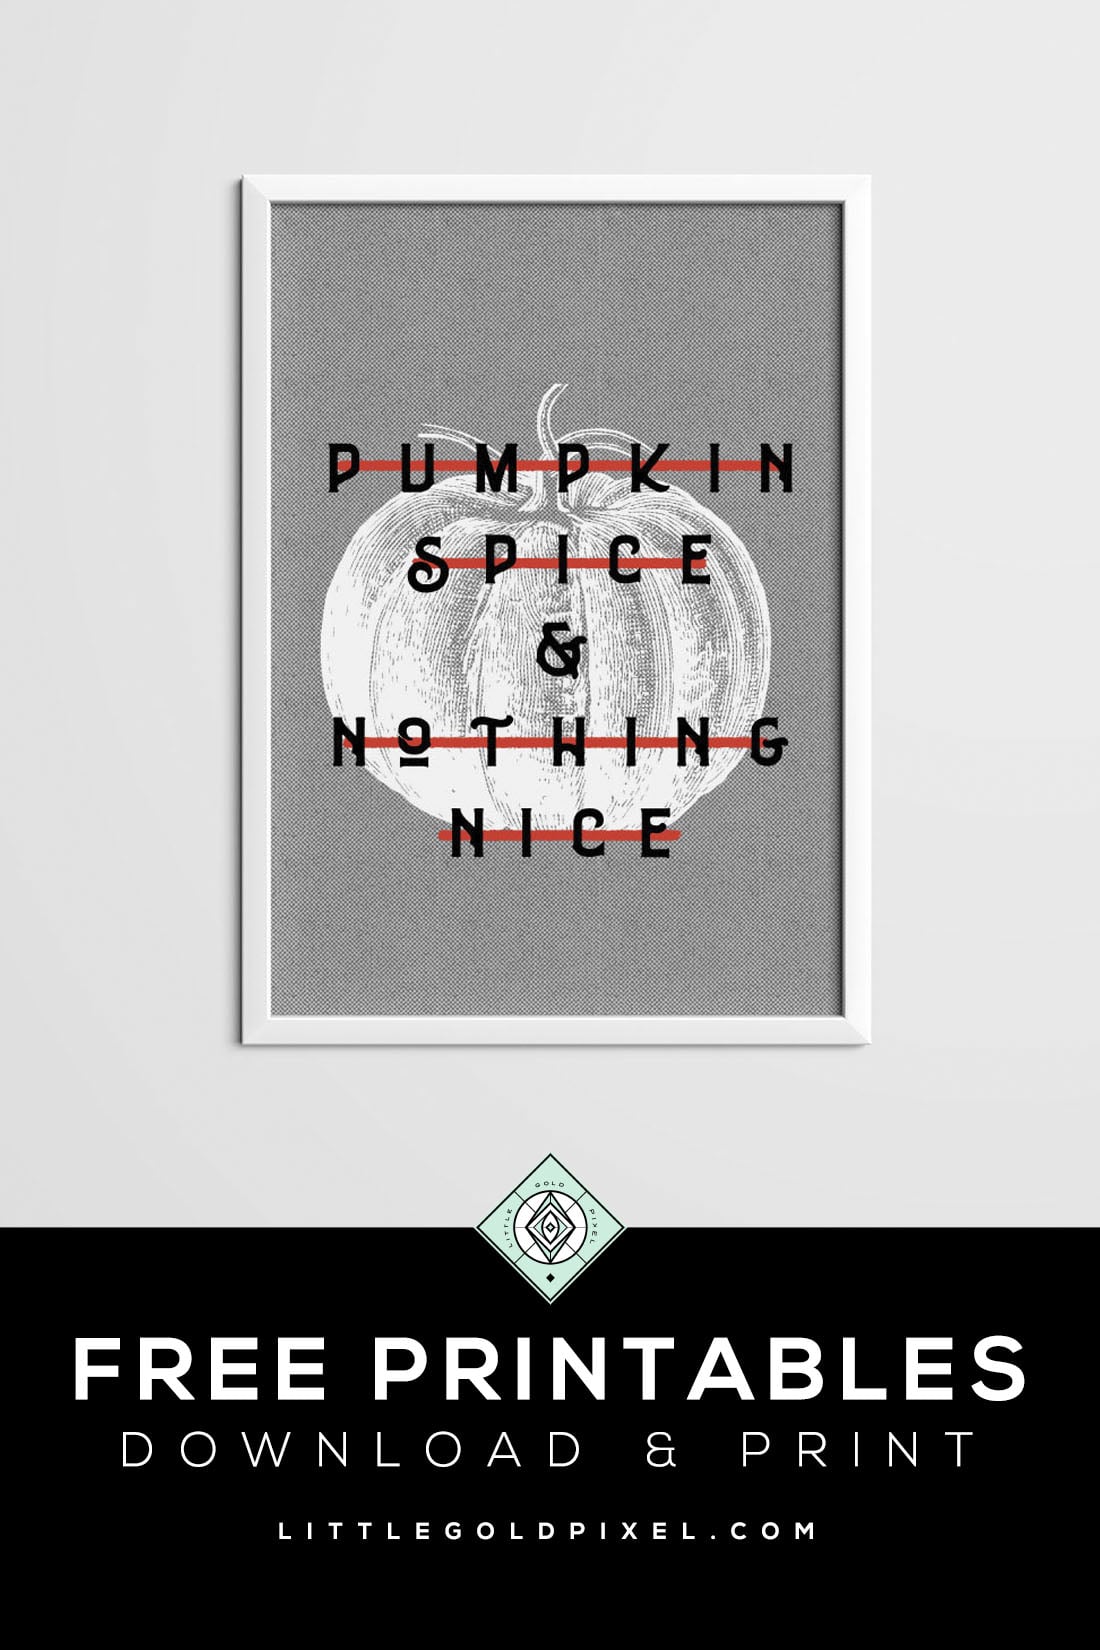 Pumpkin Spice & Nothing Nice • Freebie Fridays • Little Gold Pixel • In which I share a Pumpkin Spice & Nothing Nice free printable to help you show off your naughty side this fall. Download, print and hang today!